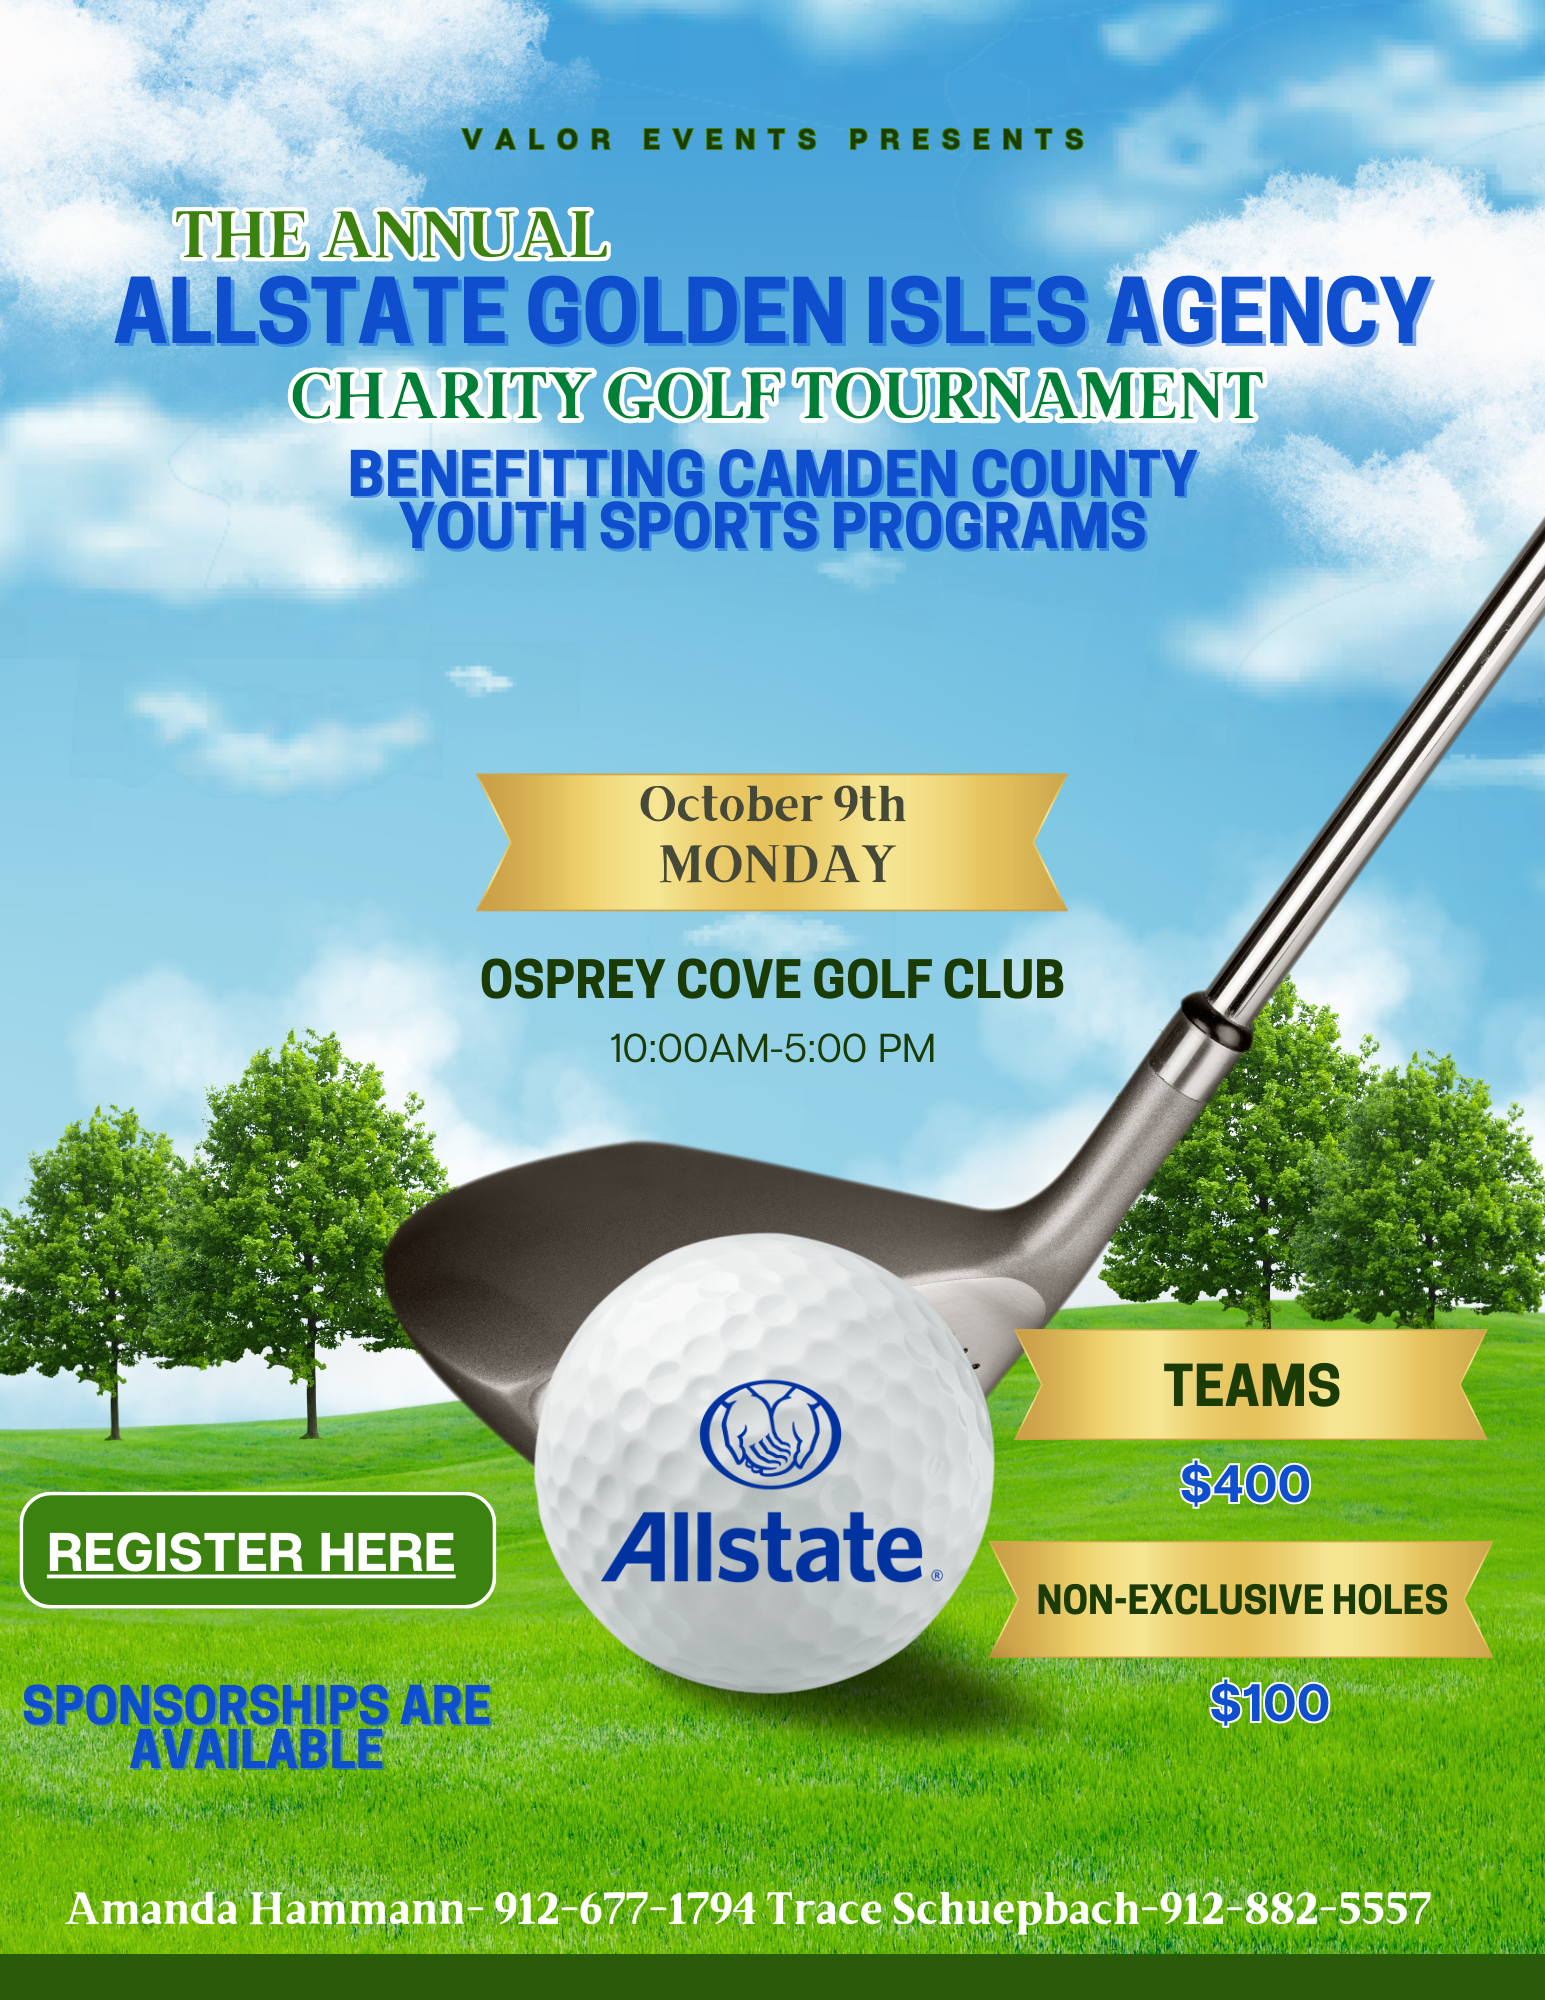 The Annual Allstate Charity Golf Tournament benefitting local youth sports